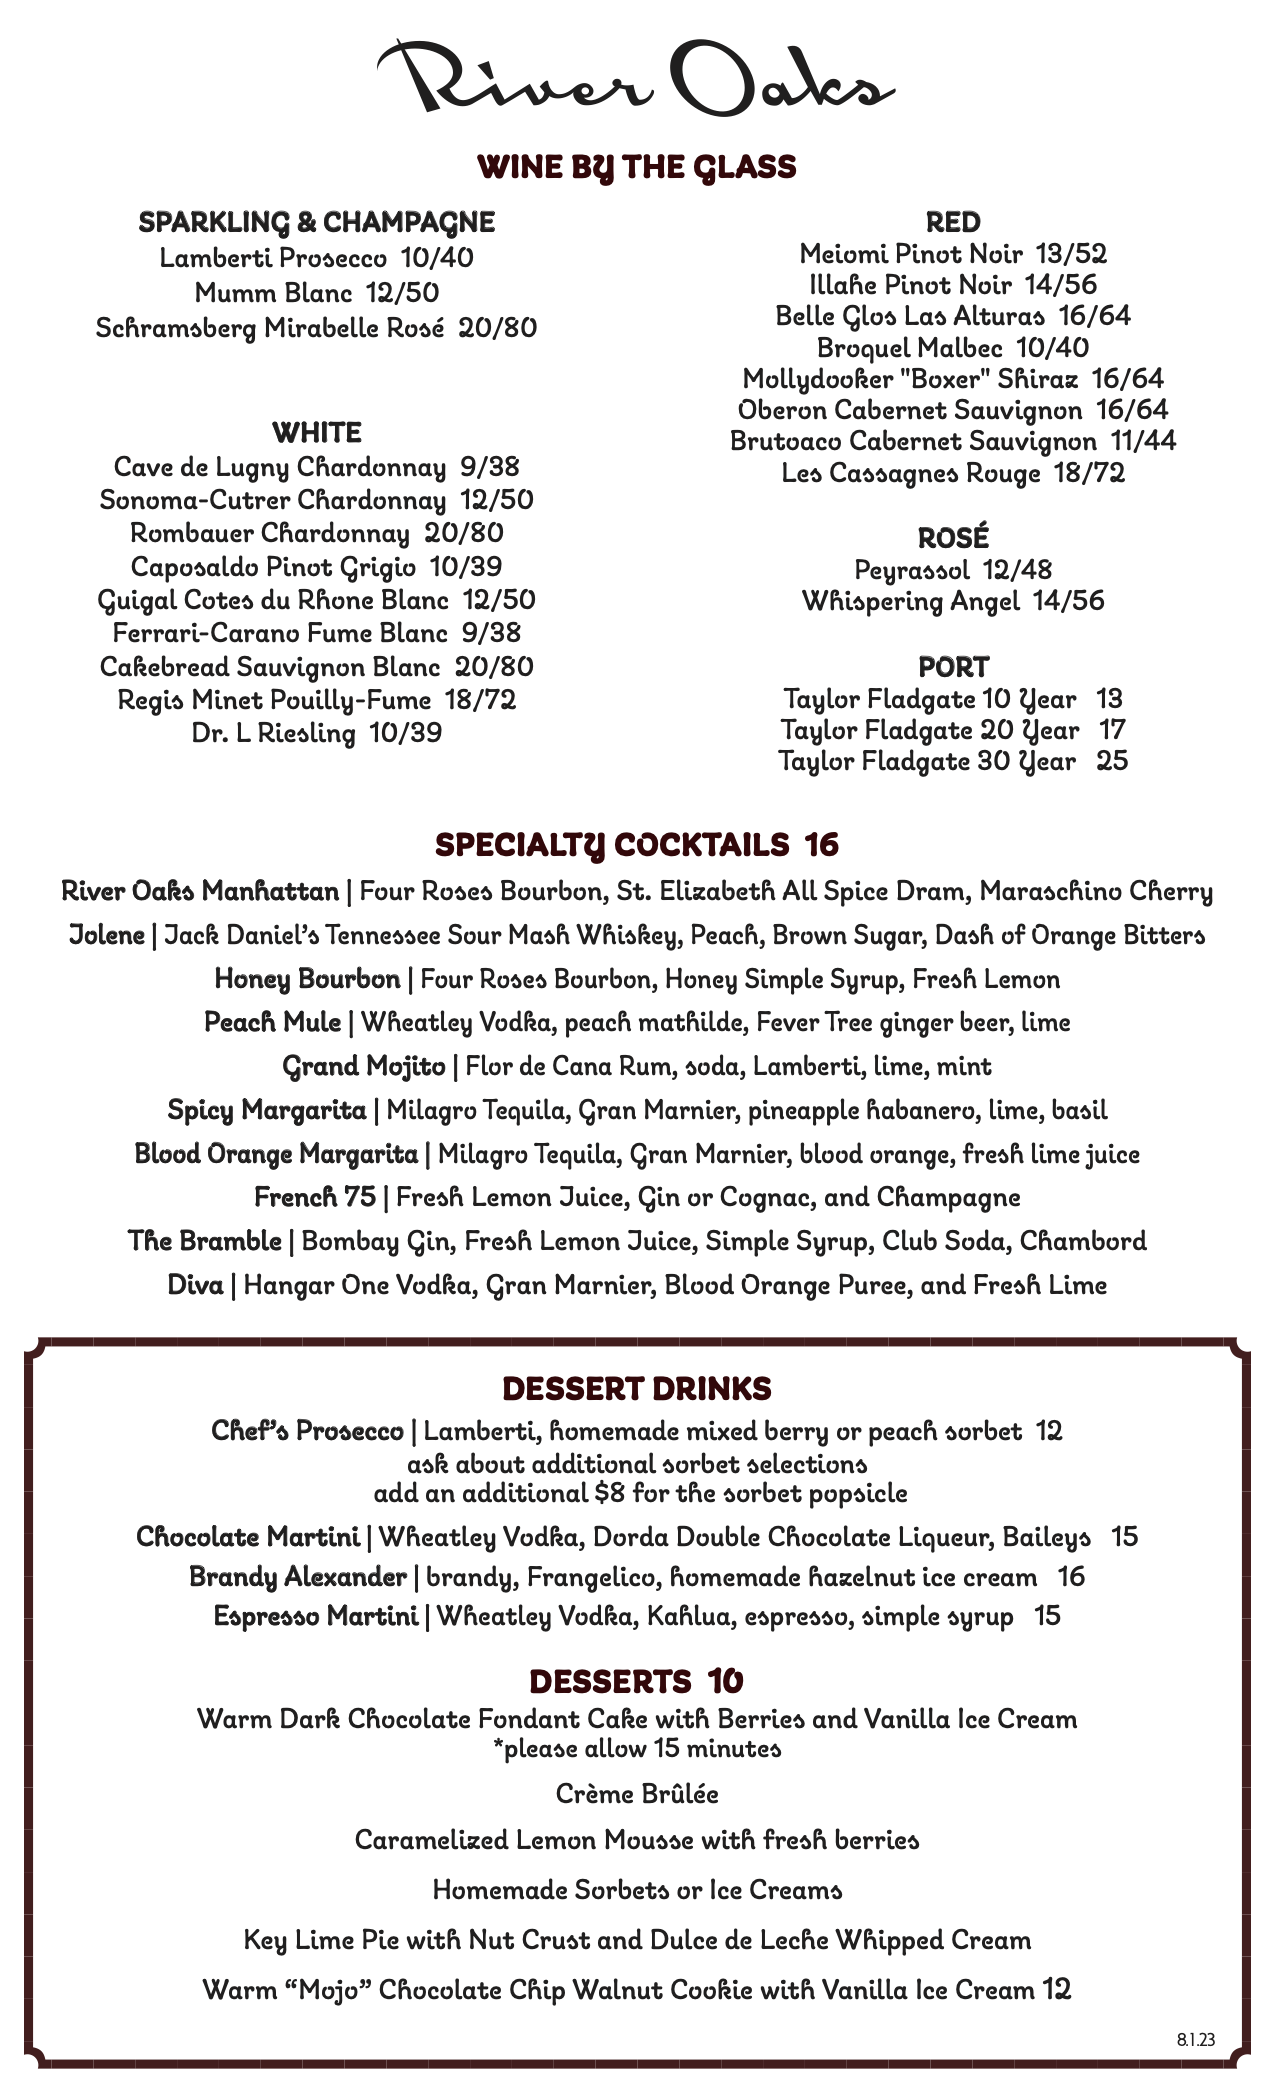 River Oaks - Wine, Cocktails by the glass, and Dessert!